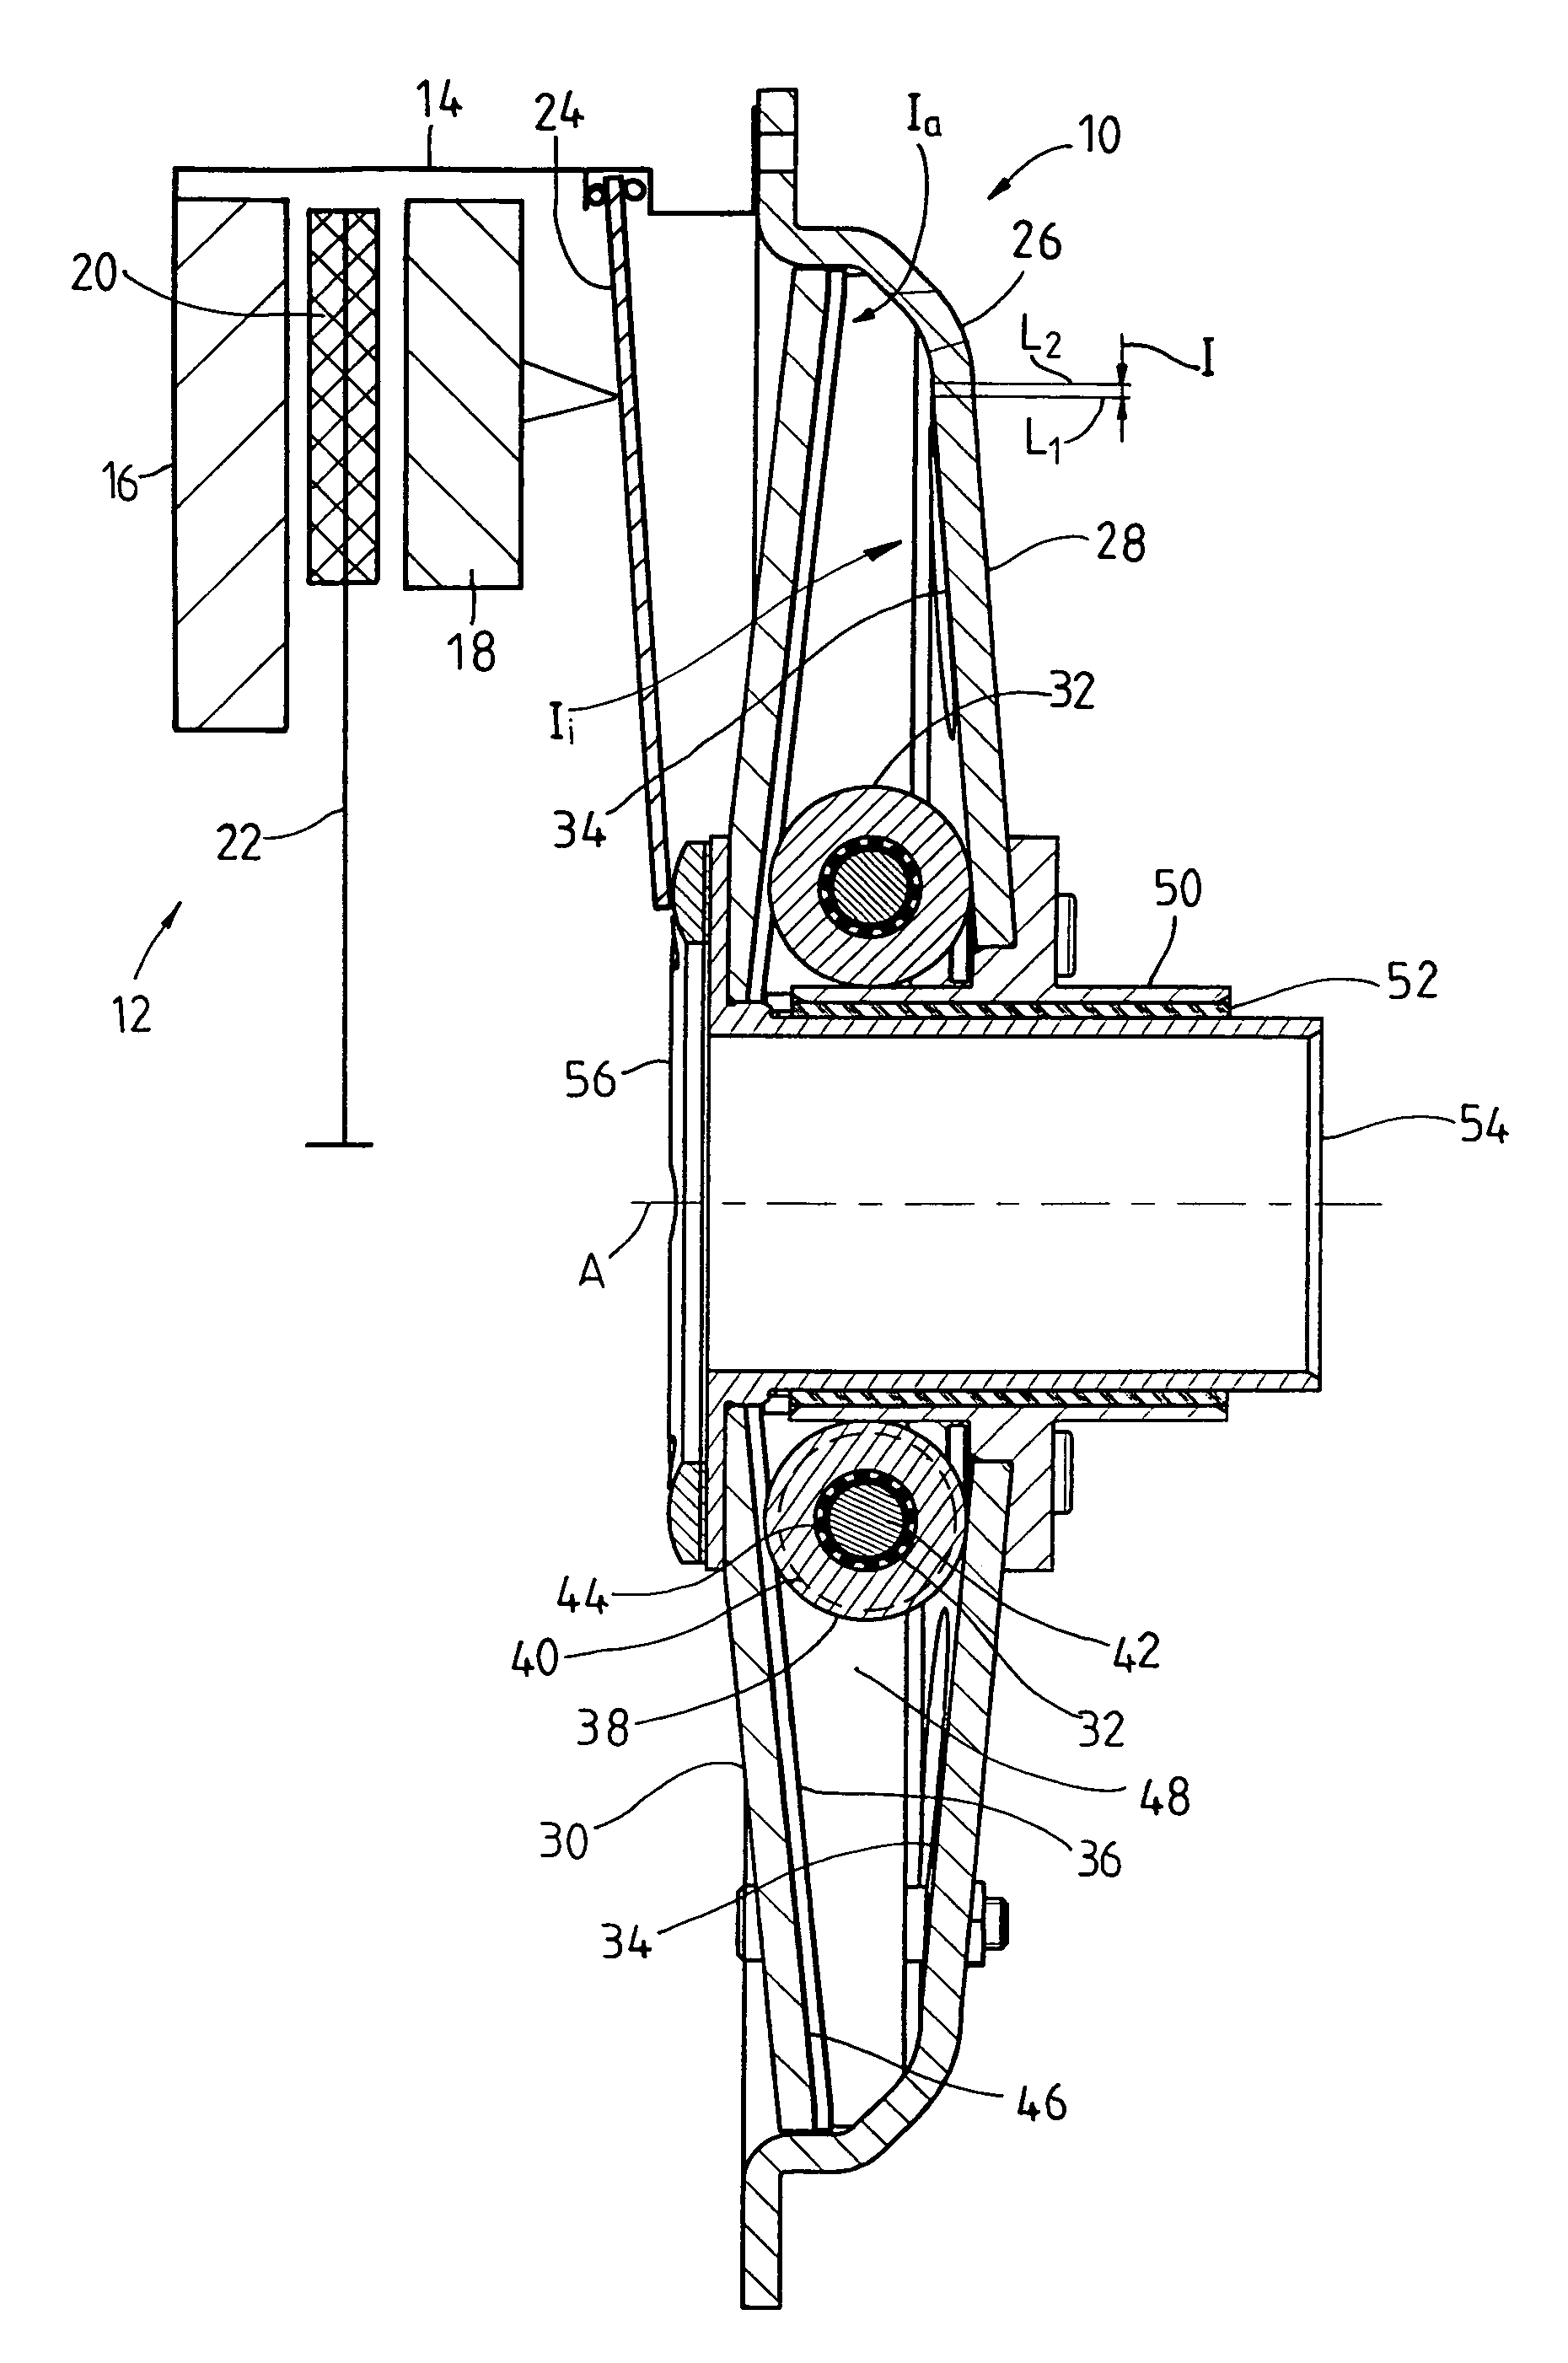 Arrangement for generating actuation force in a centrifugal clutch